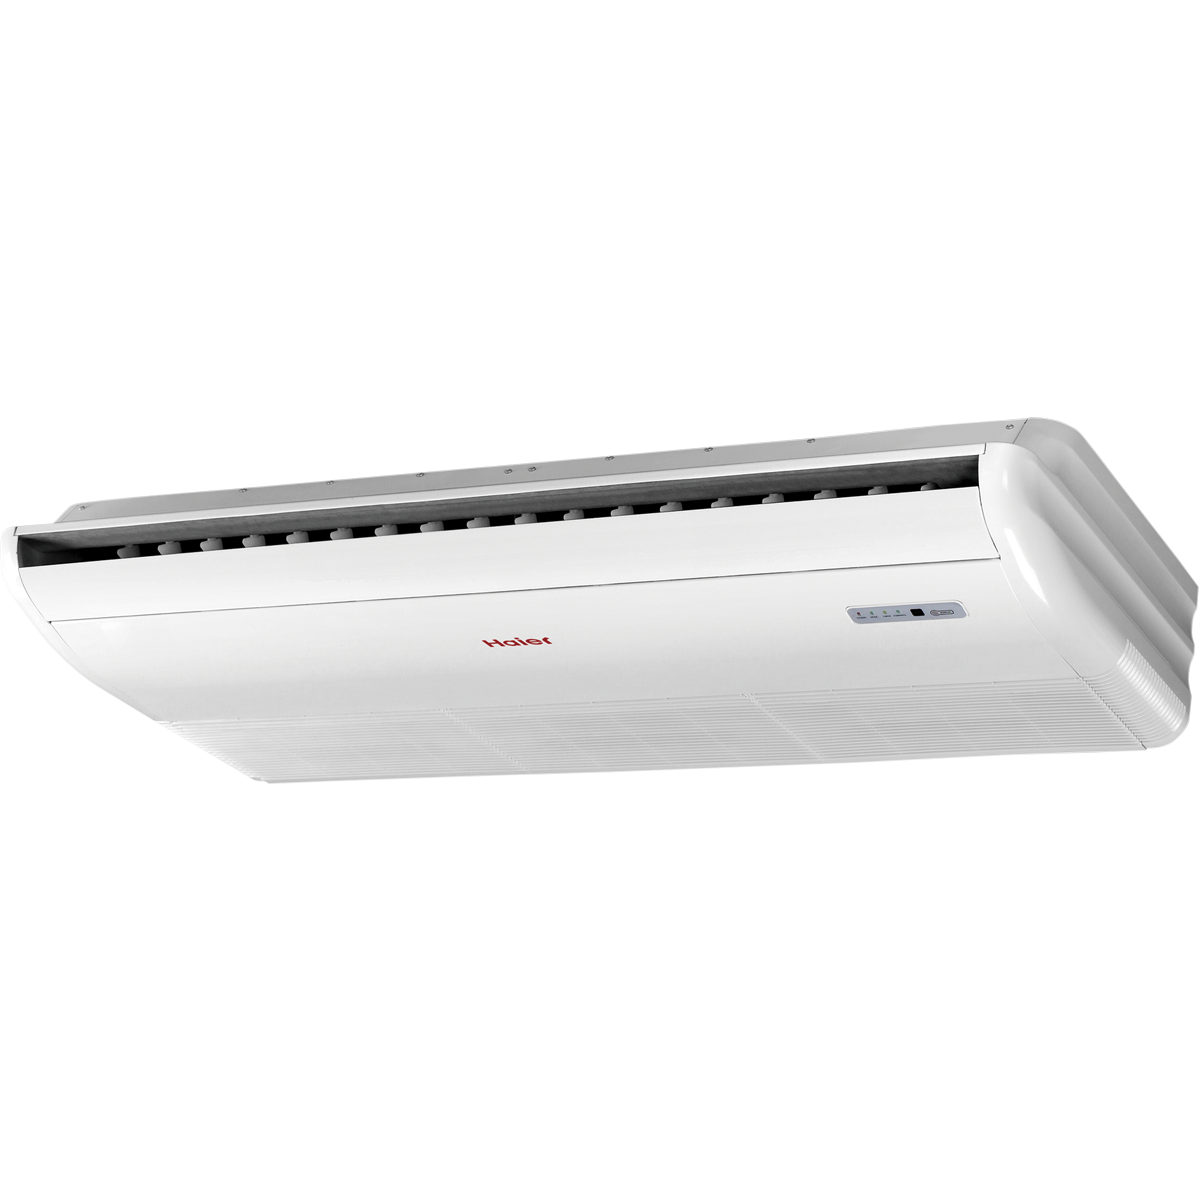 Air conditioner PNG, transparent png download